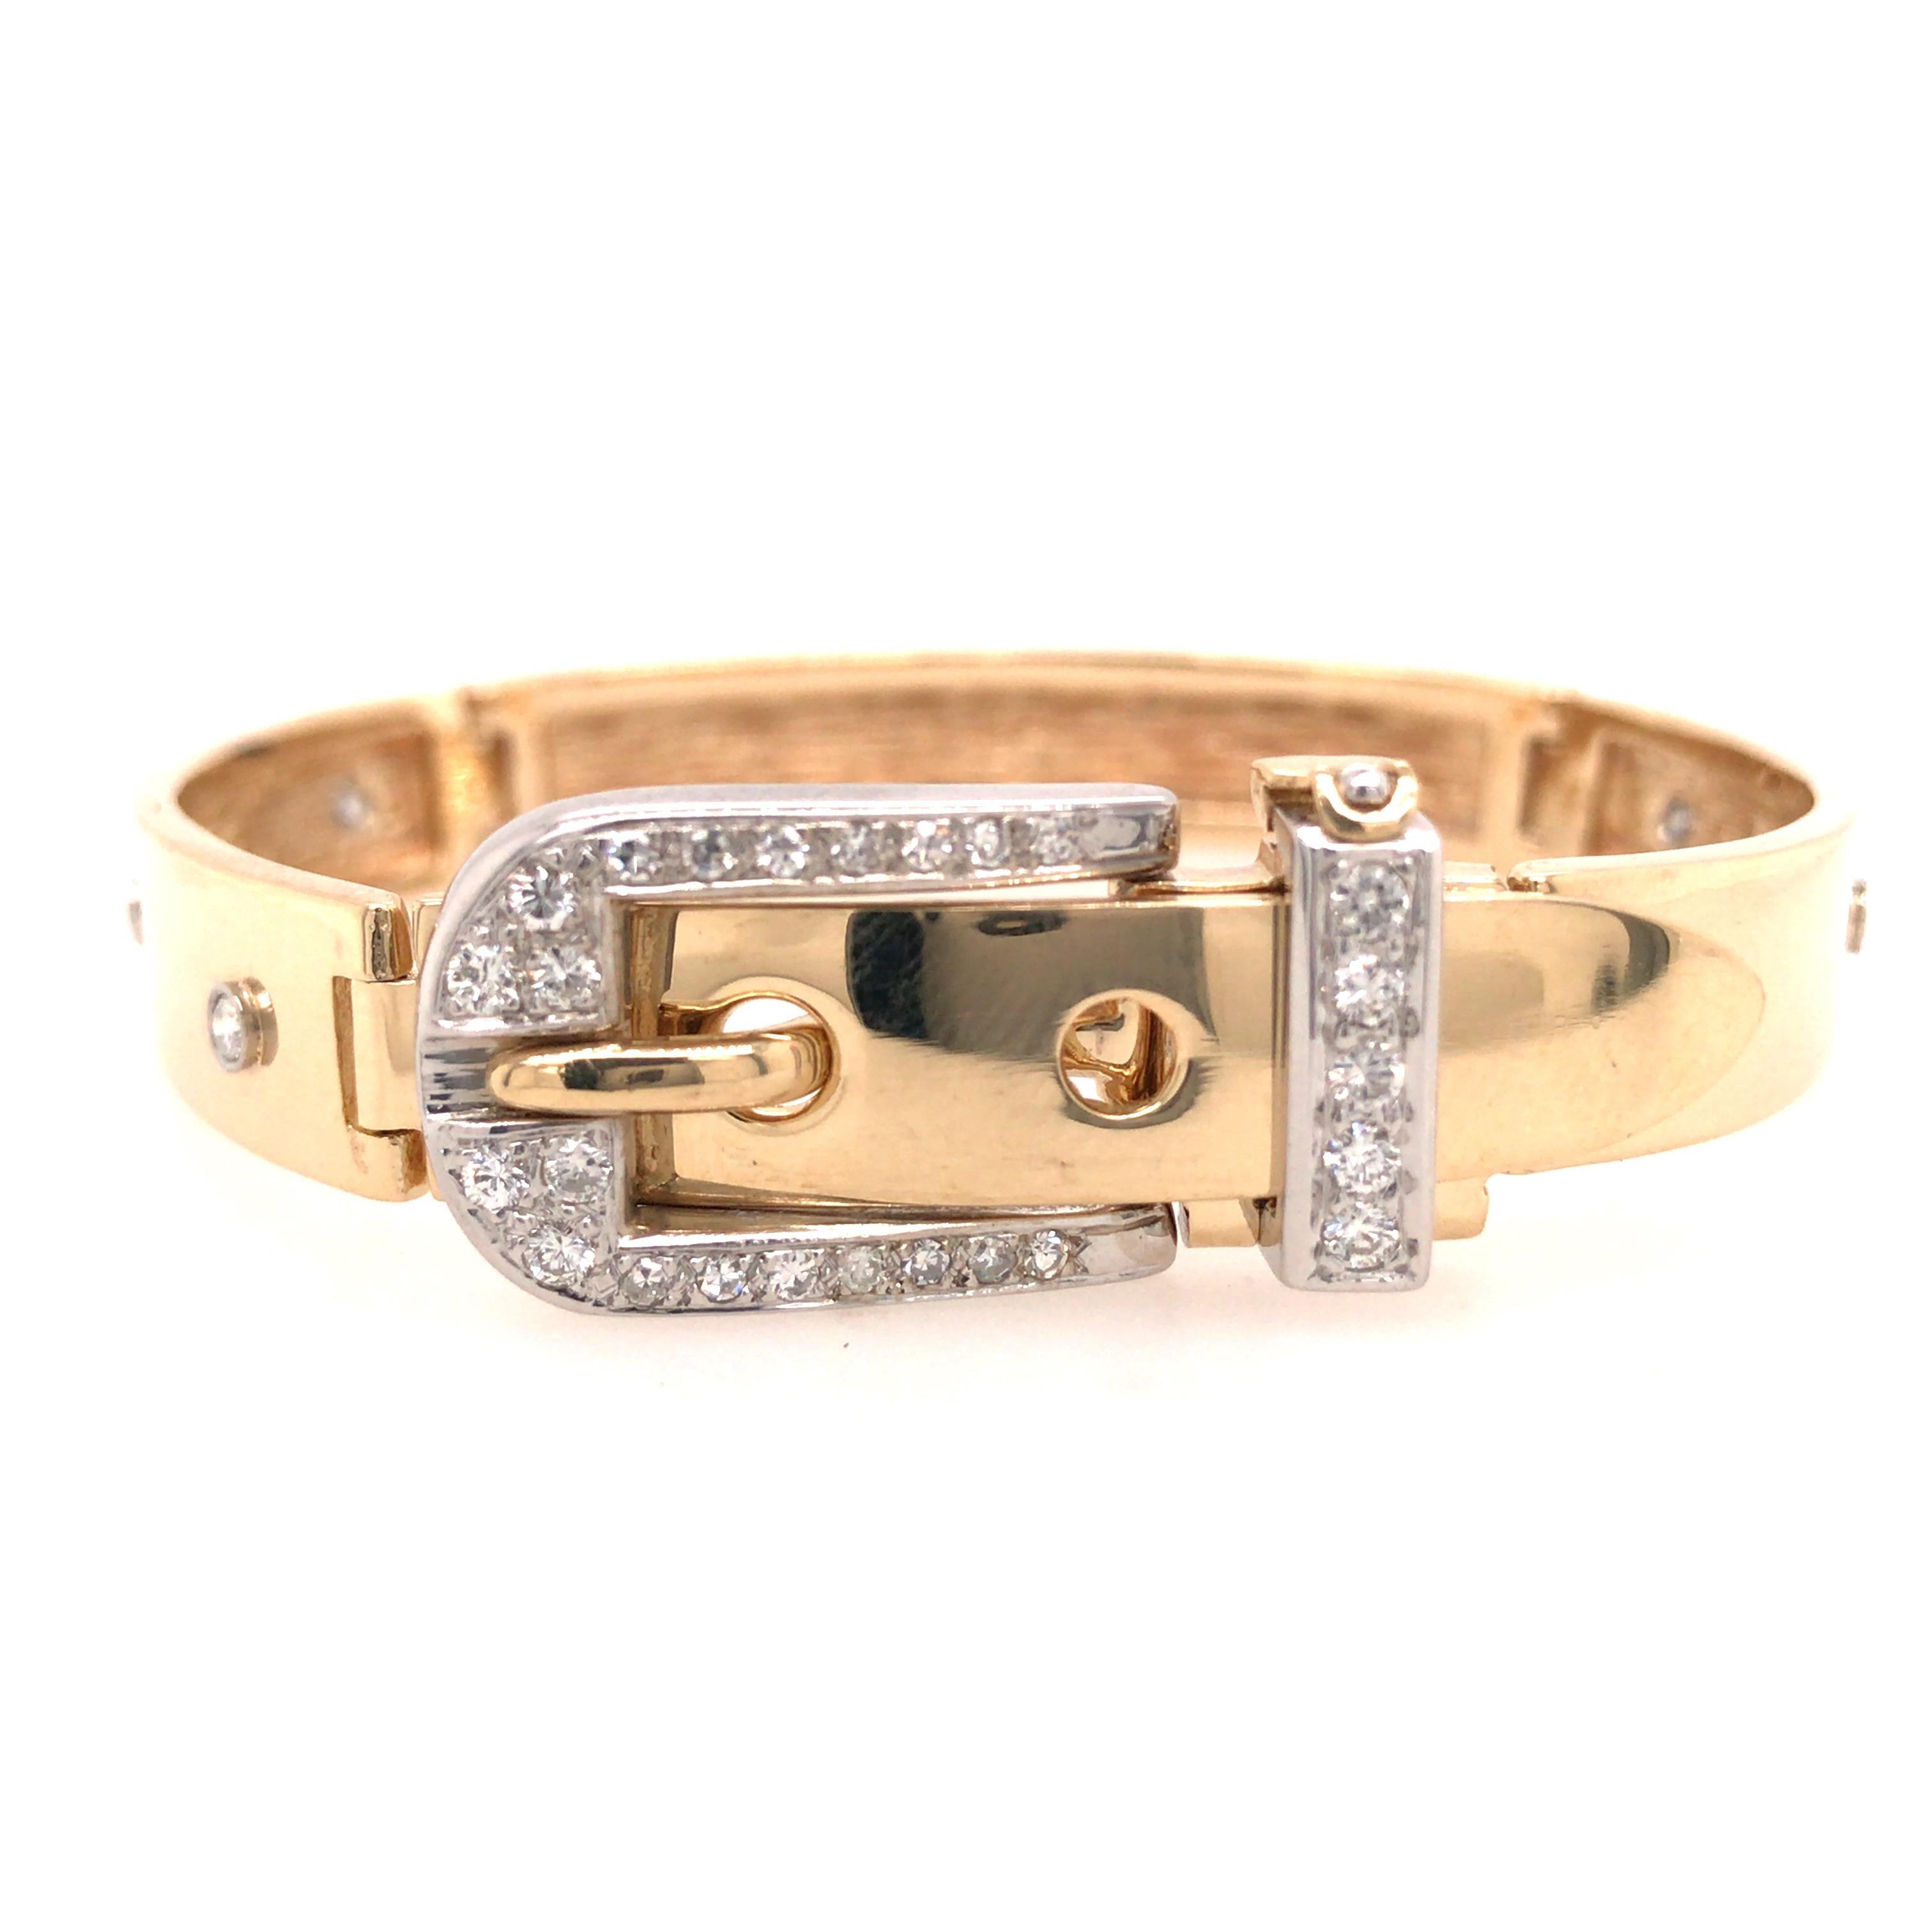 Hammerman Brothers Diamond Buckle Bracelet in 14K Two-Tone Gold.  Round Brilliant Cut Diamonds weighing 1.03 carat total weight, F-G in color and VS1-VS2 in clarity.  The Bracelet measures 7 1/2 inch in length and 3/8 inch in width.  24.72 grams. 